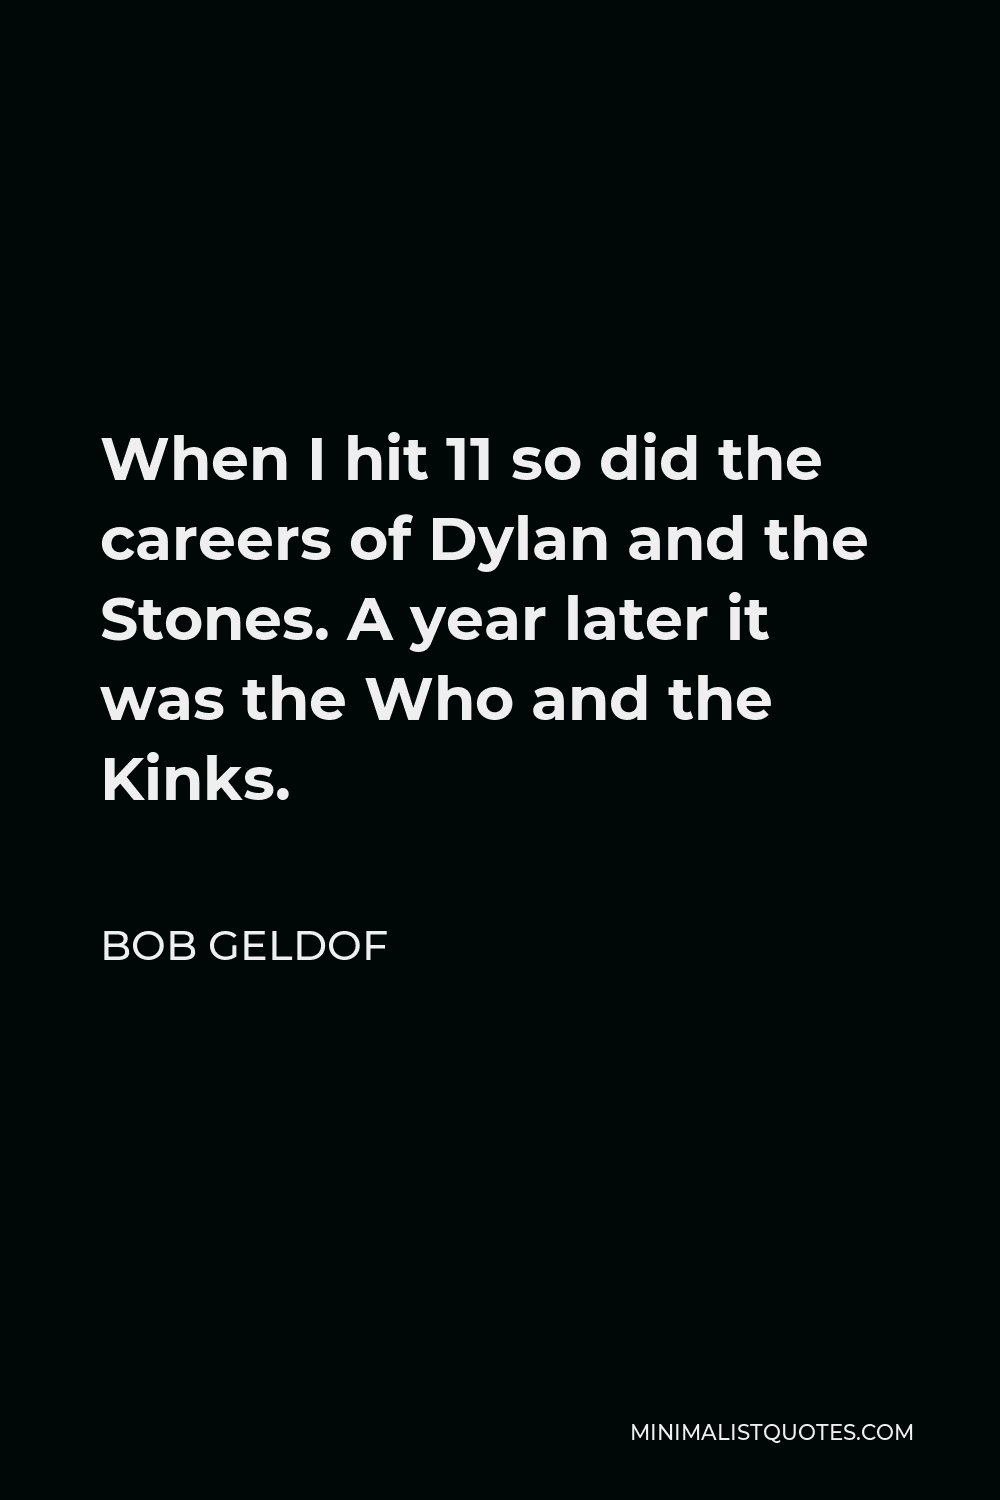 Bob Geldof Quote - When I hit 11 so did the careers of Dylan and the Stones. A year later it was the Who and the Kinks.